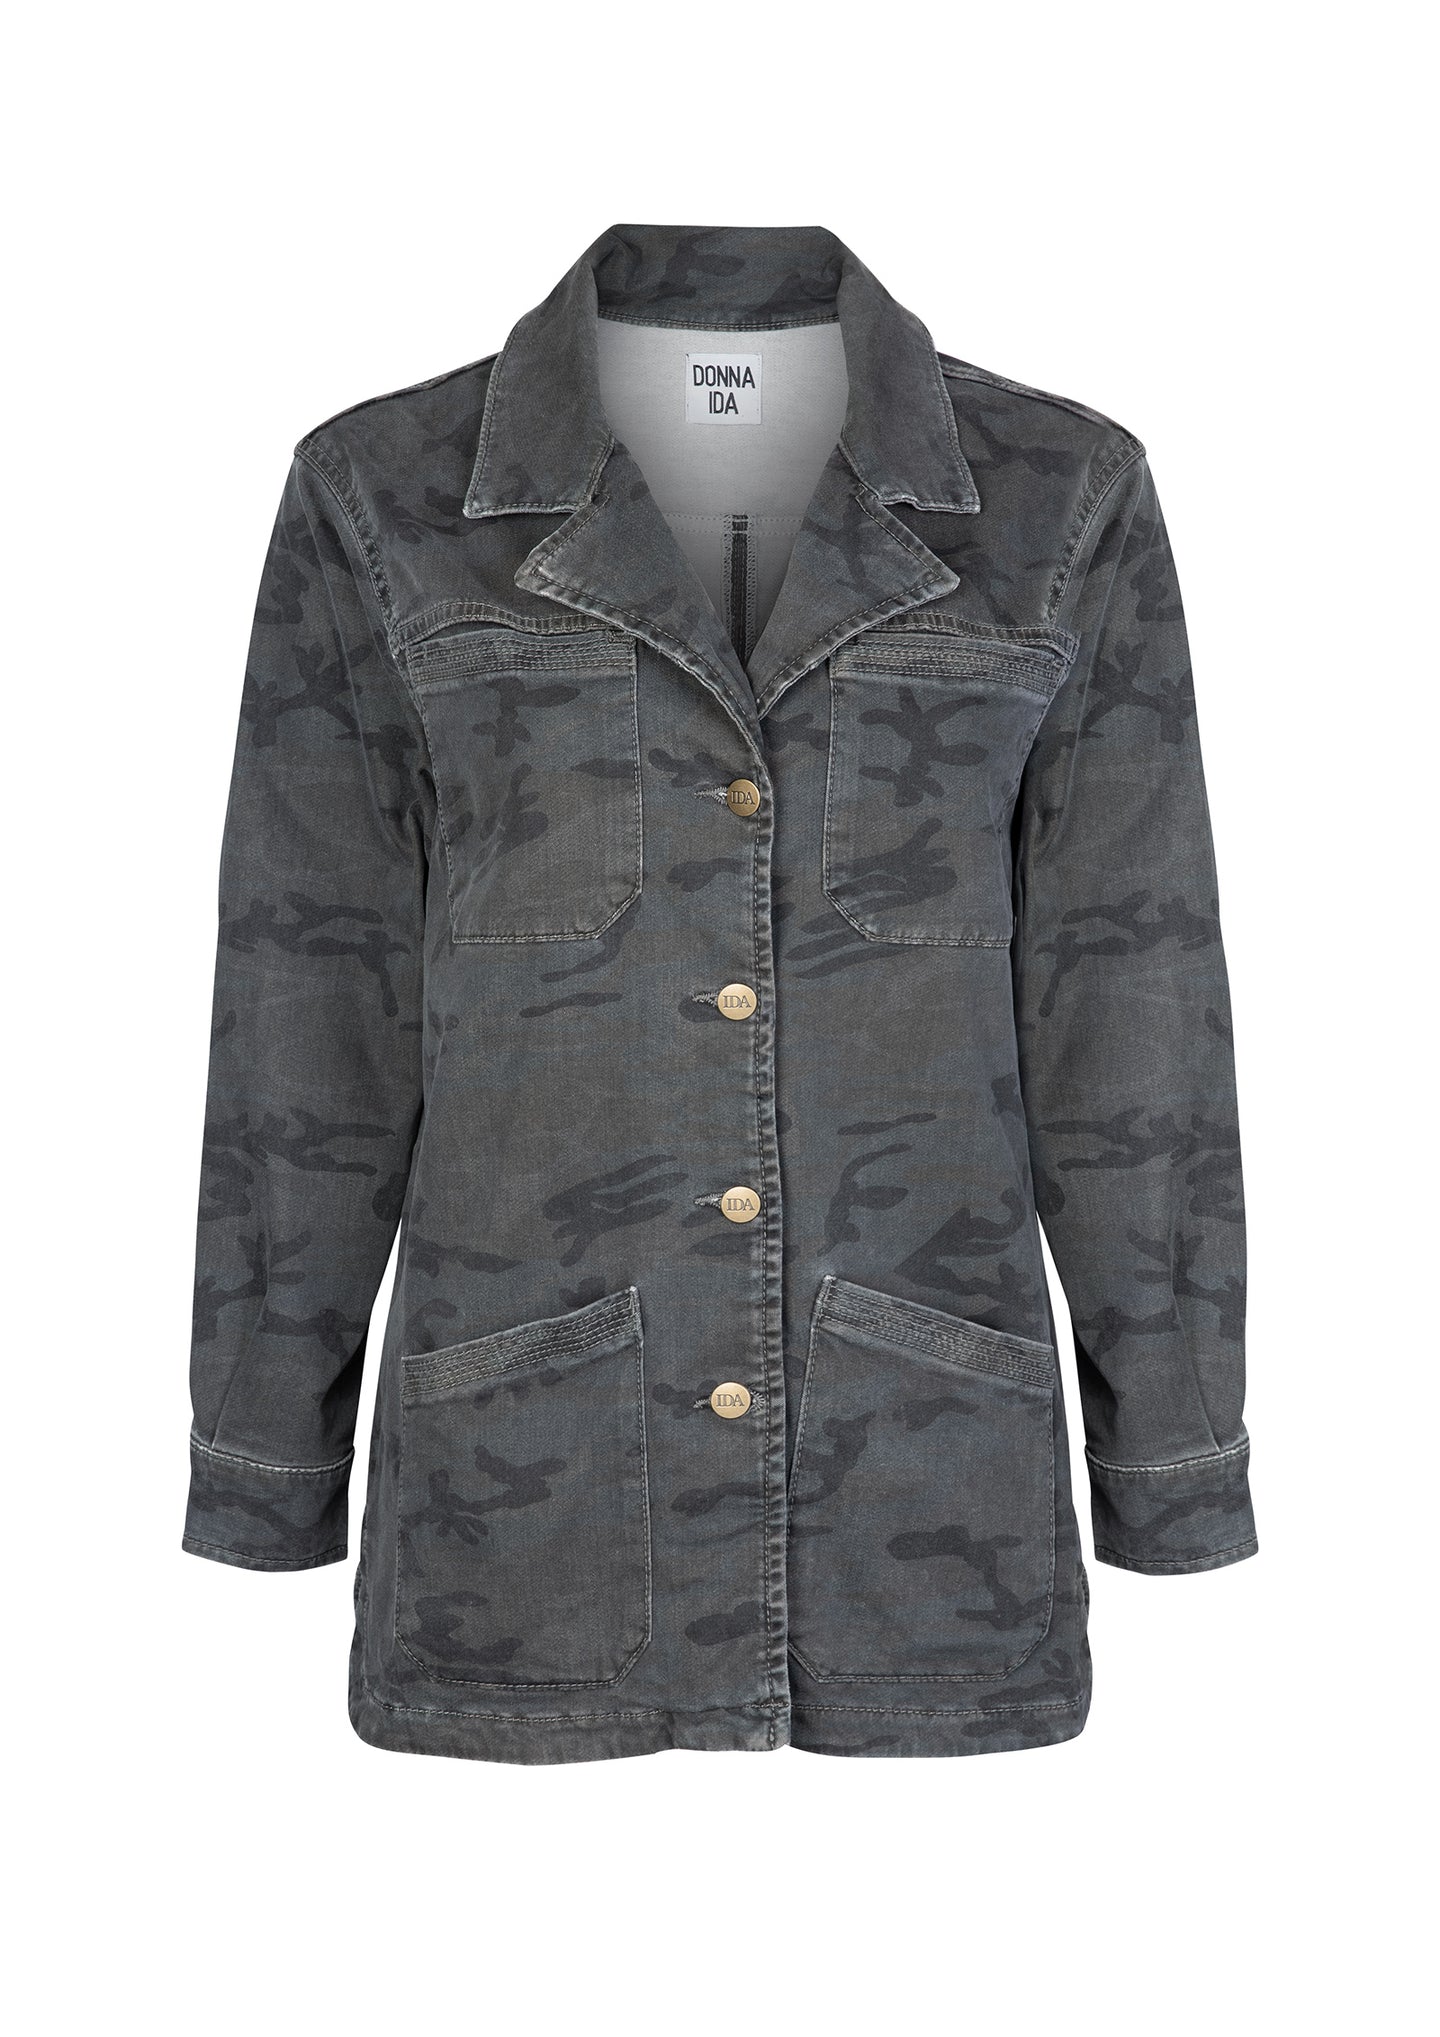 Special Agent Venter The Relaxed Khaki Jacket | Midnight Mission [Camouflage]